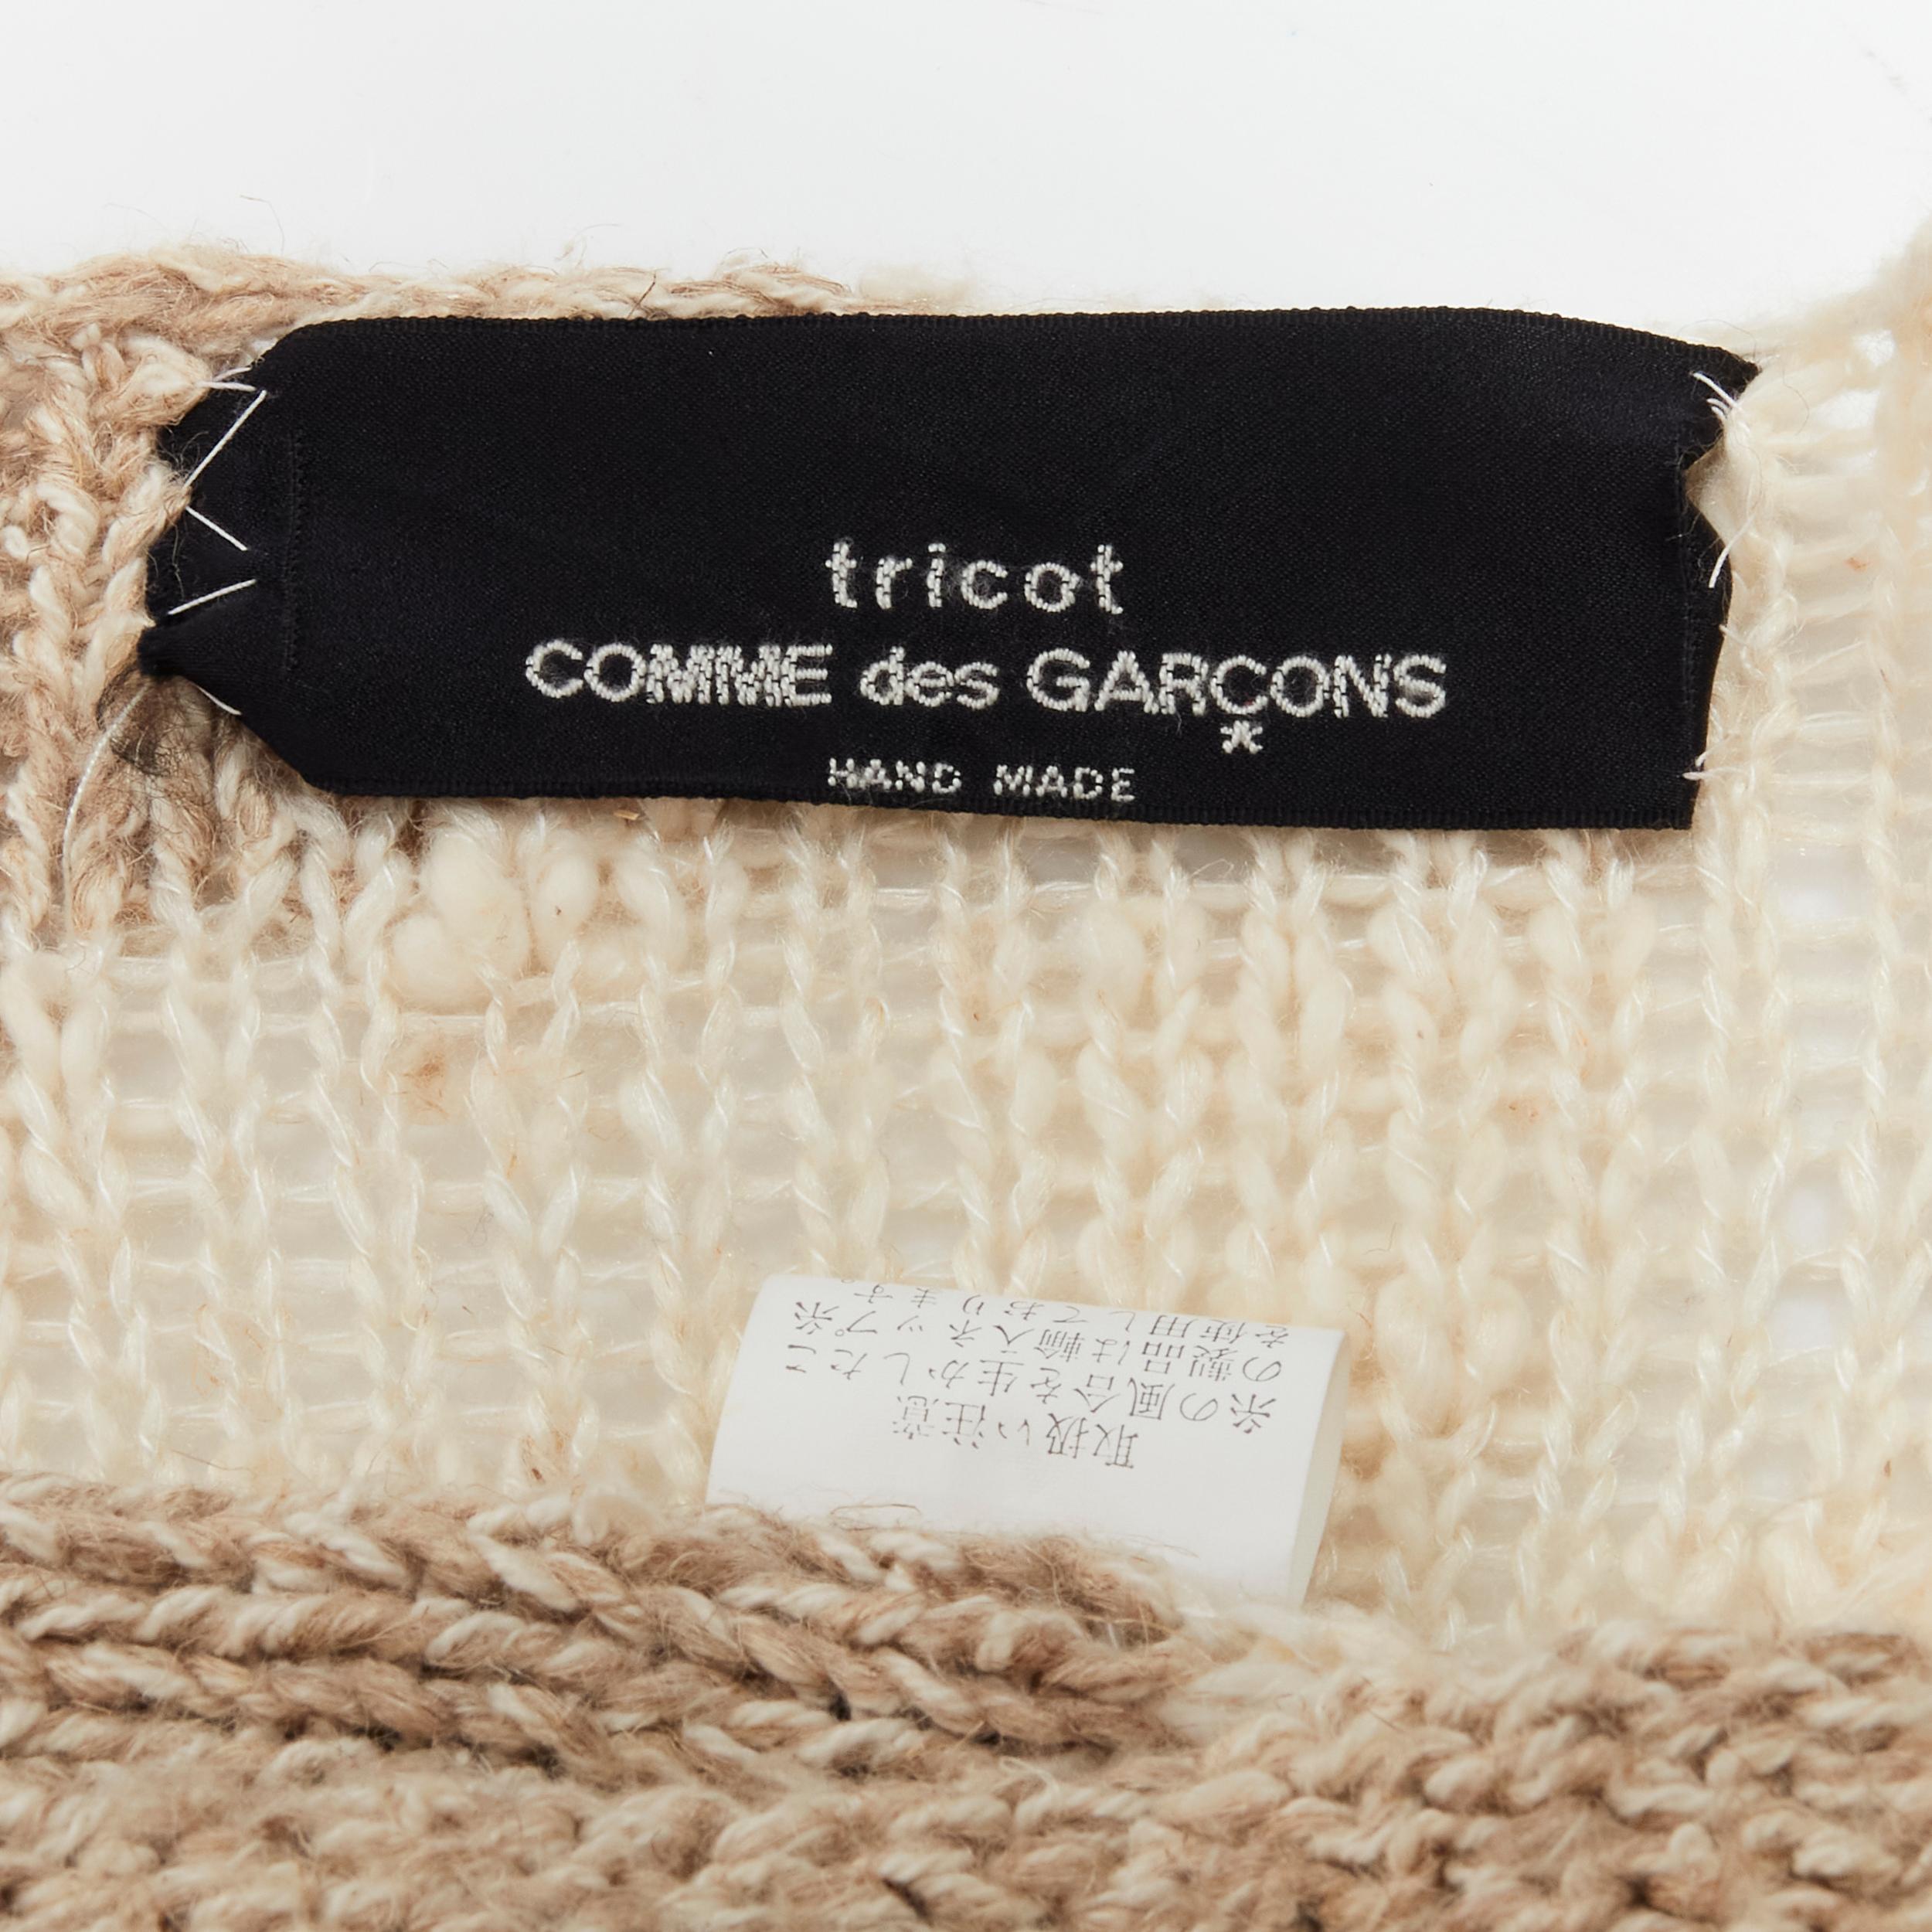 TRICOT COMME DES GARCONS 1980's Vintage Hand Made crochet knit wool sweater For Sale 4